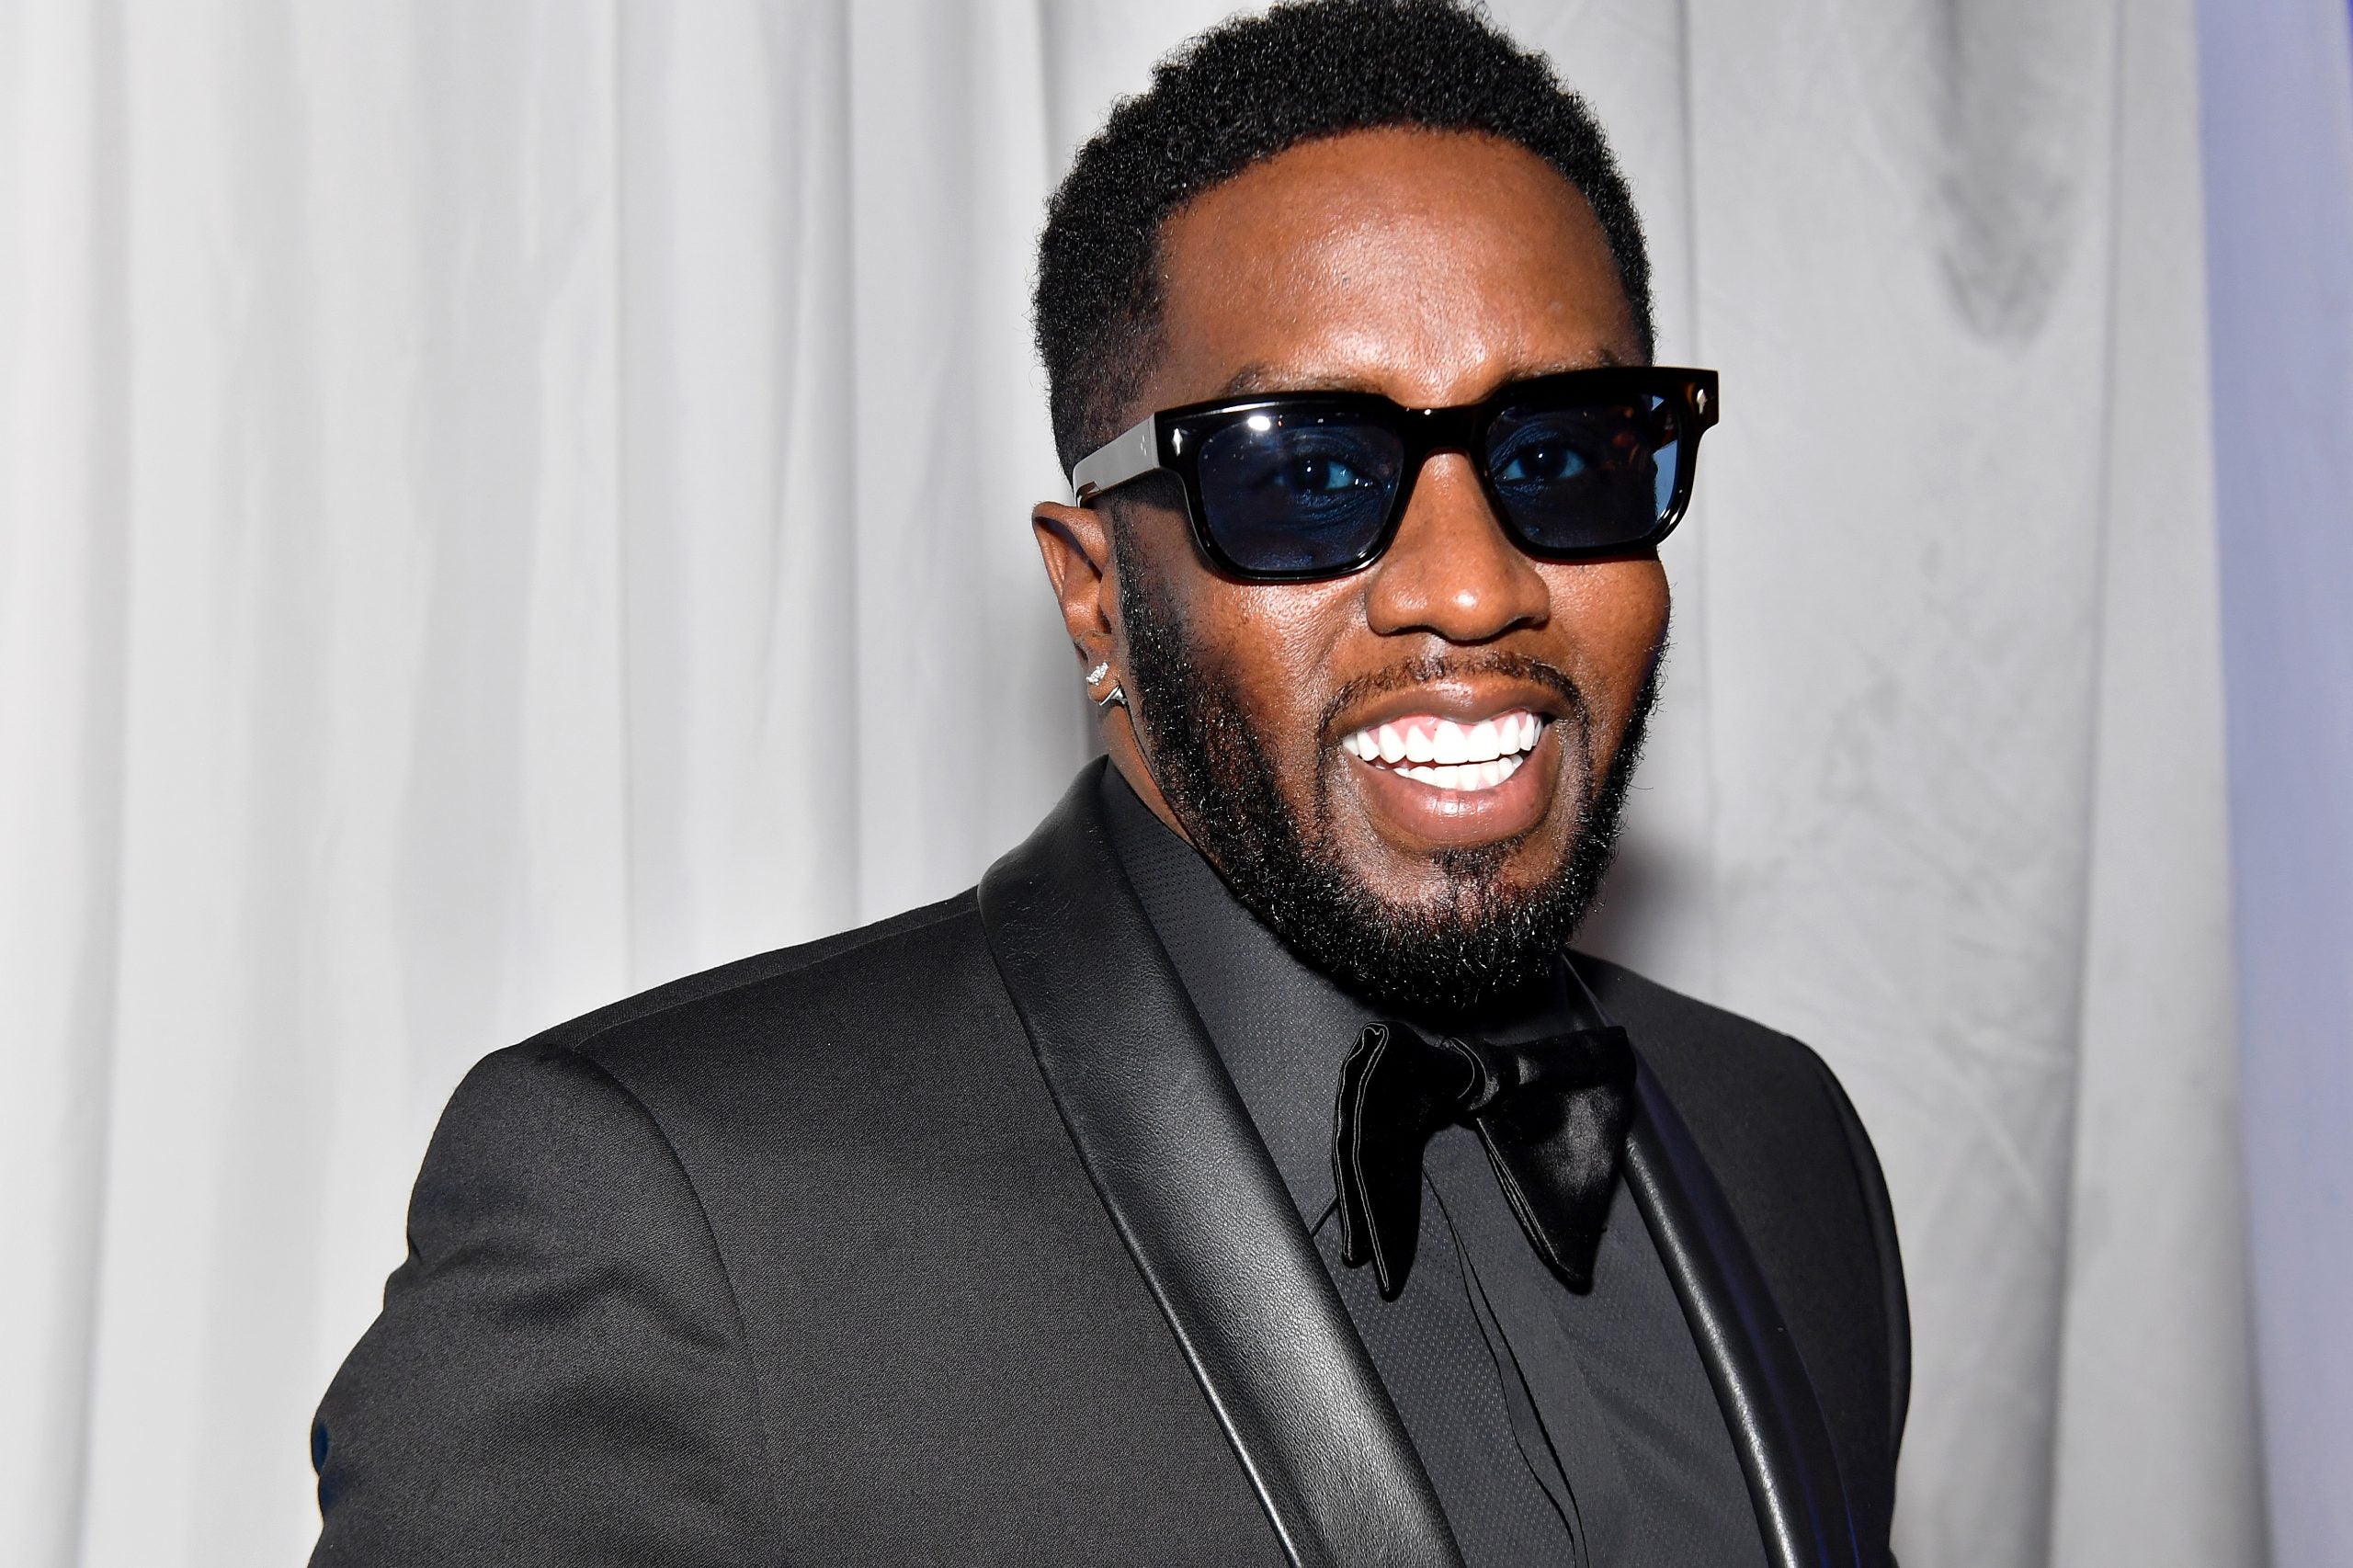 Diddy Set To Hit The BET Awards Stage With Career Retrospective Performance